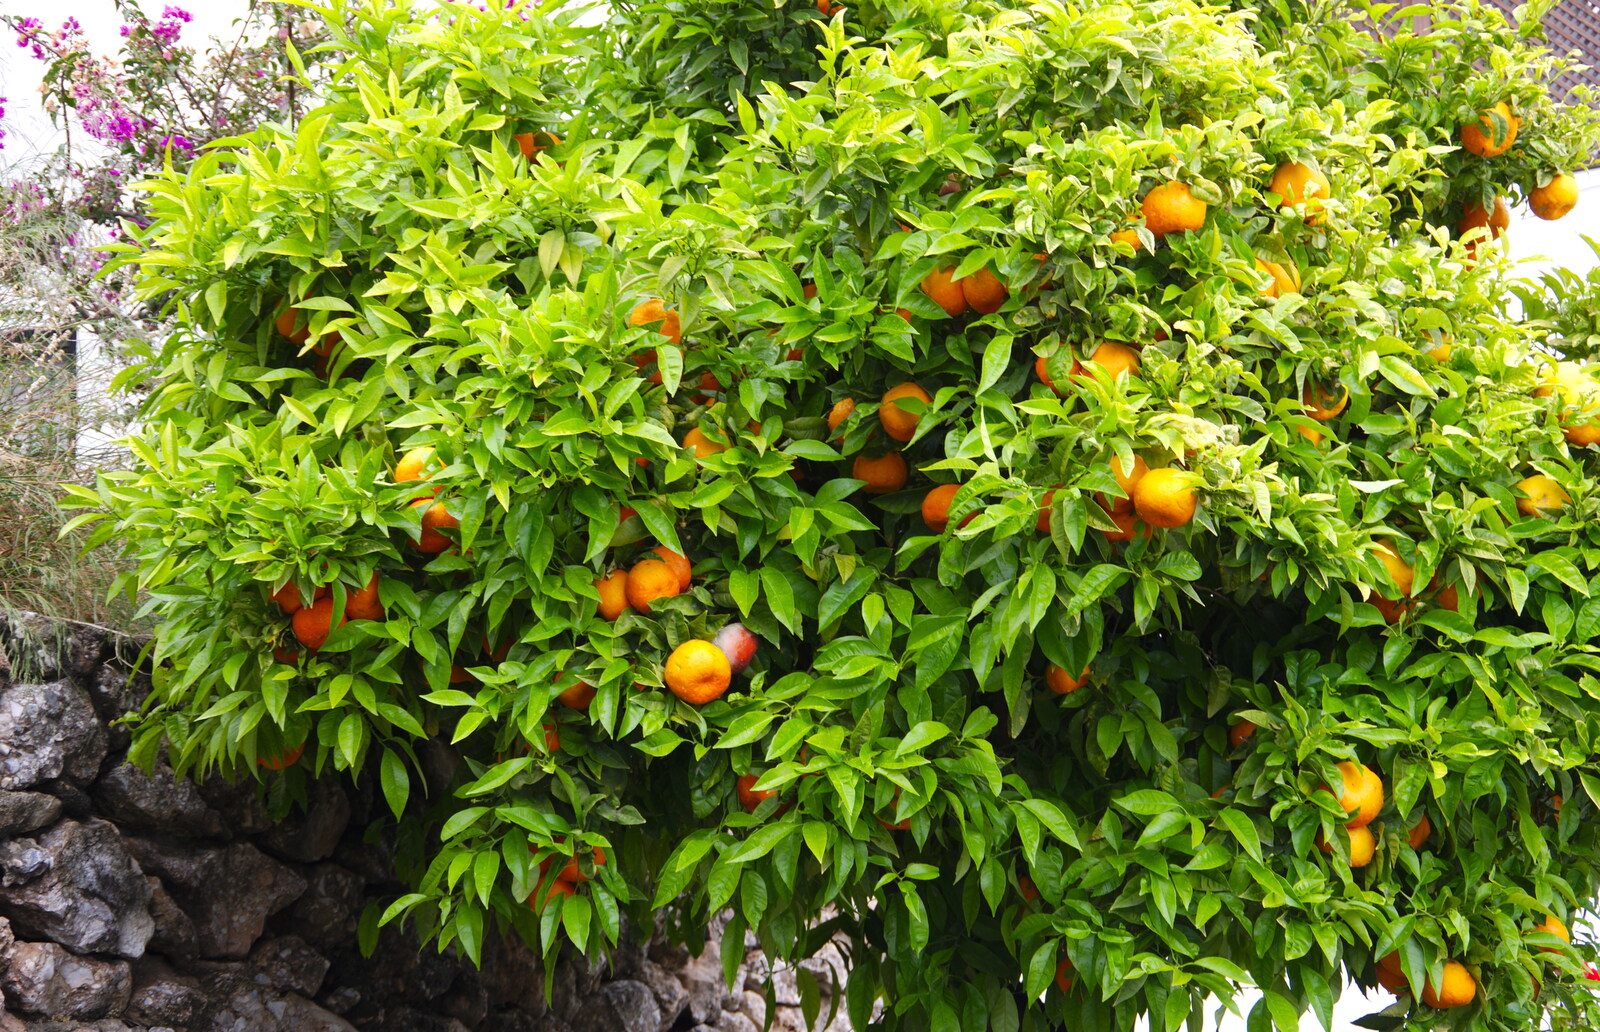 We're constantly amused to see actual orange trees from The Caves of Nerja, and Frigiliana, Andalusia, Spain - 18th April 2019